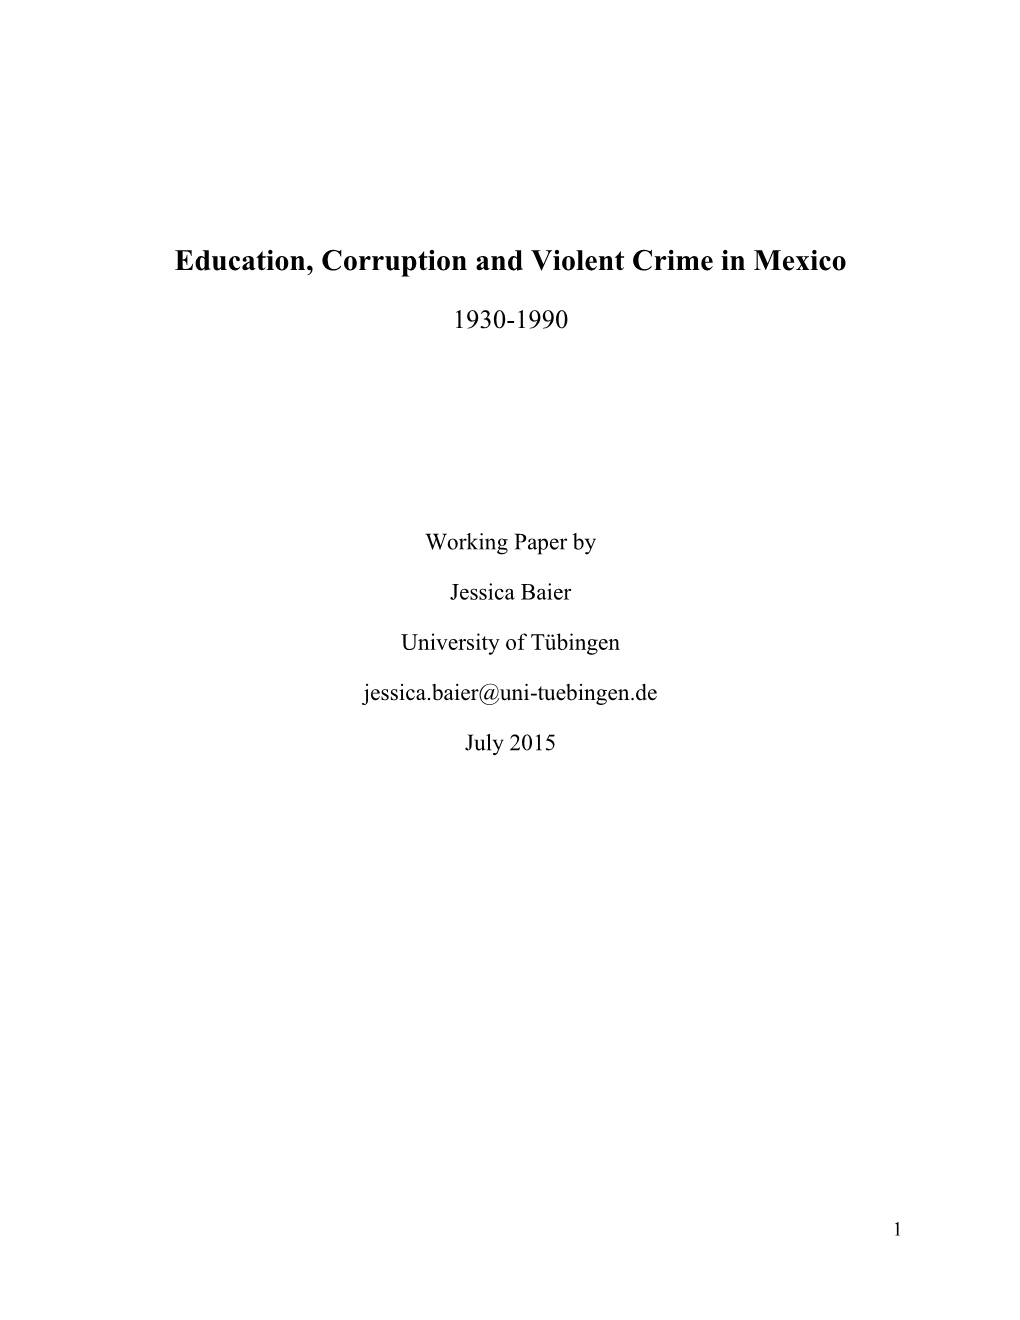 Education, Corruption and Violent Crime in Mexico